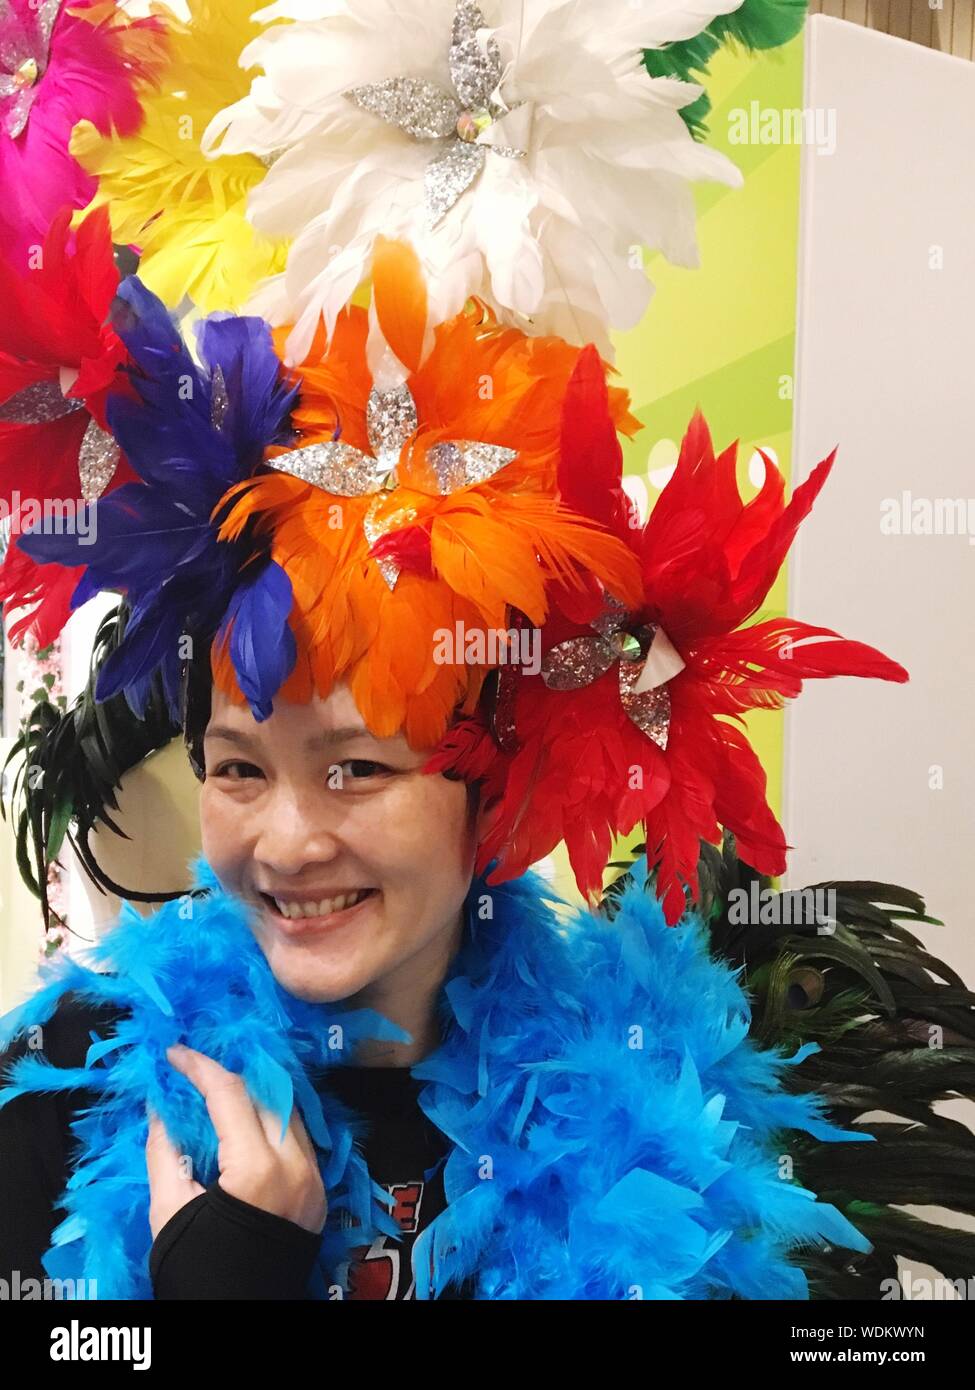 Portrait Of Smiling Woman With Feather Boa Stock Photo